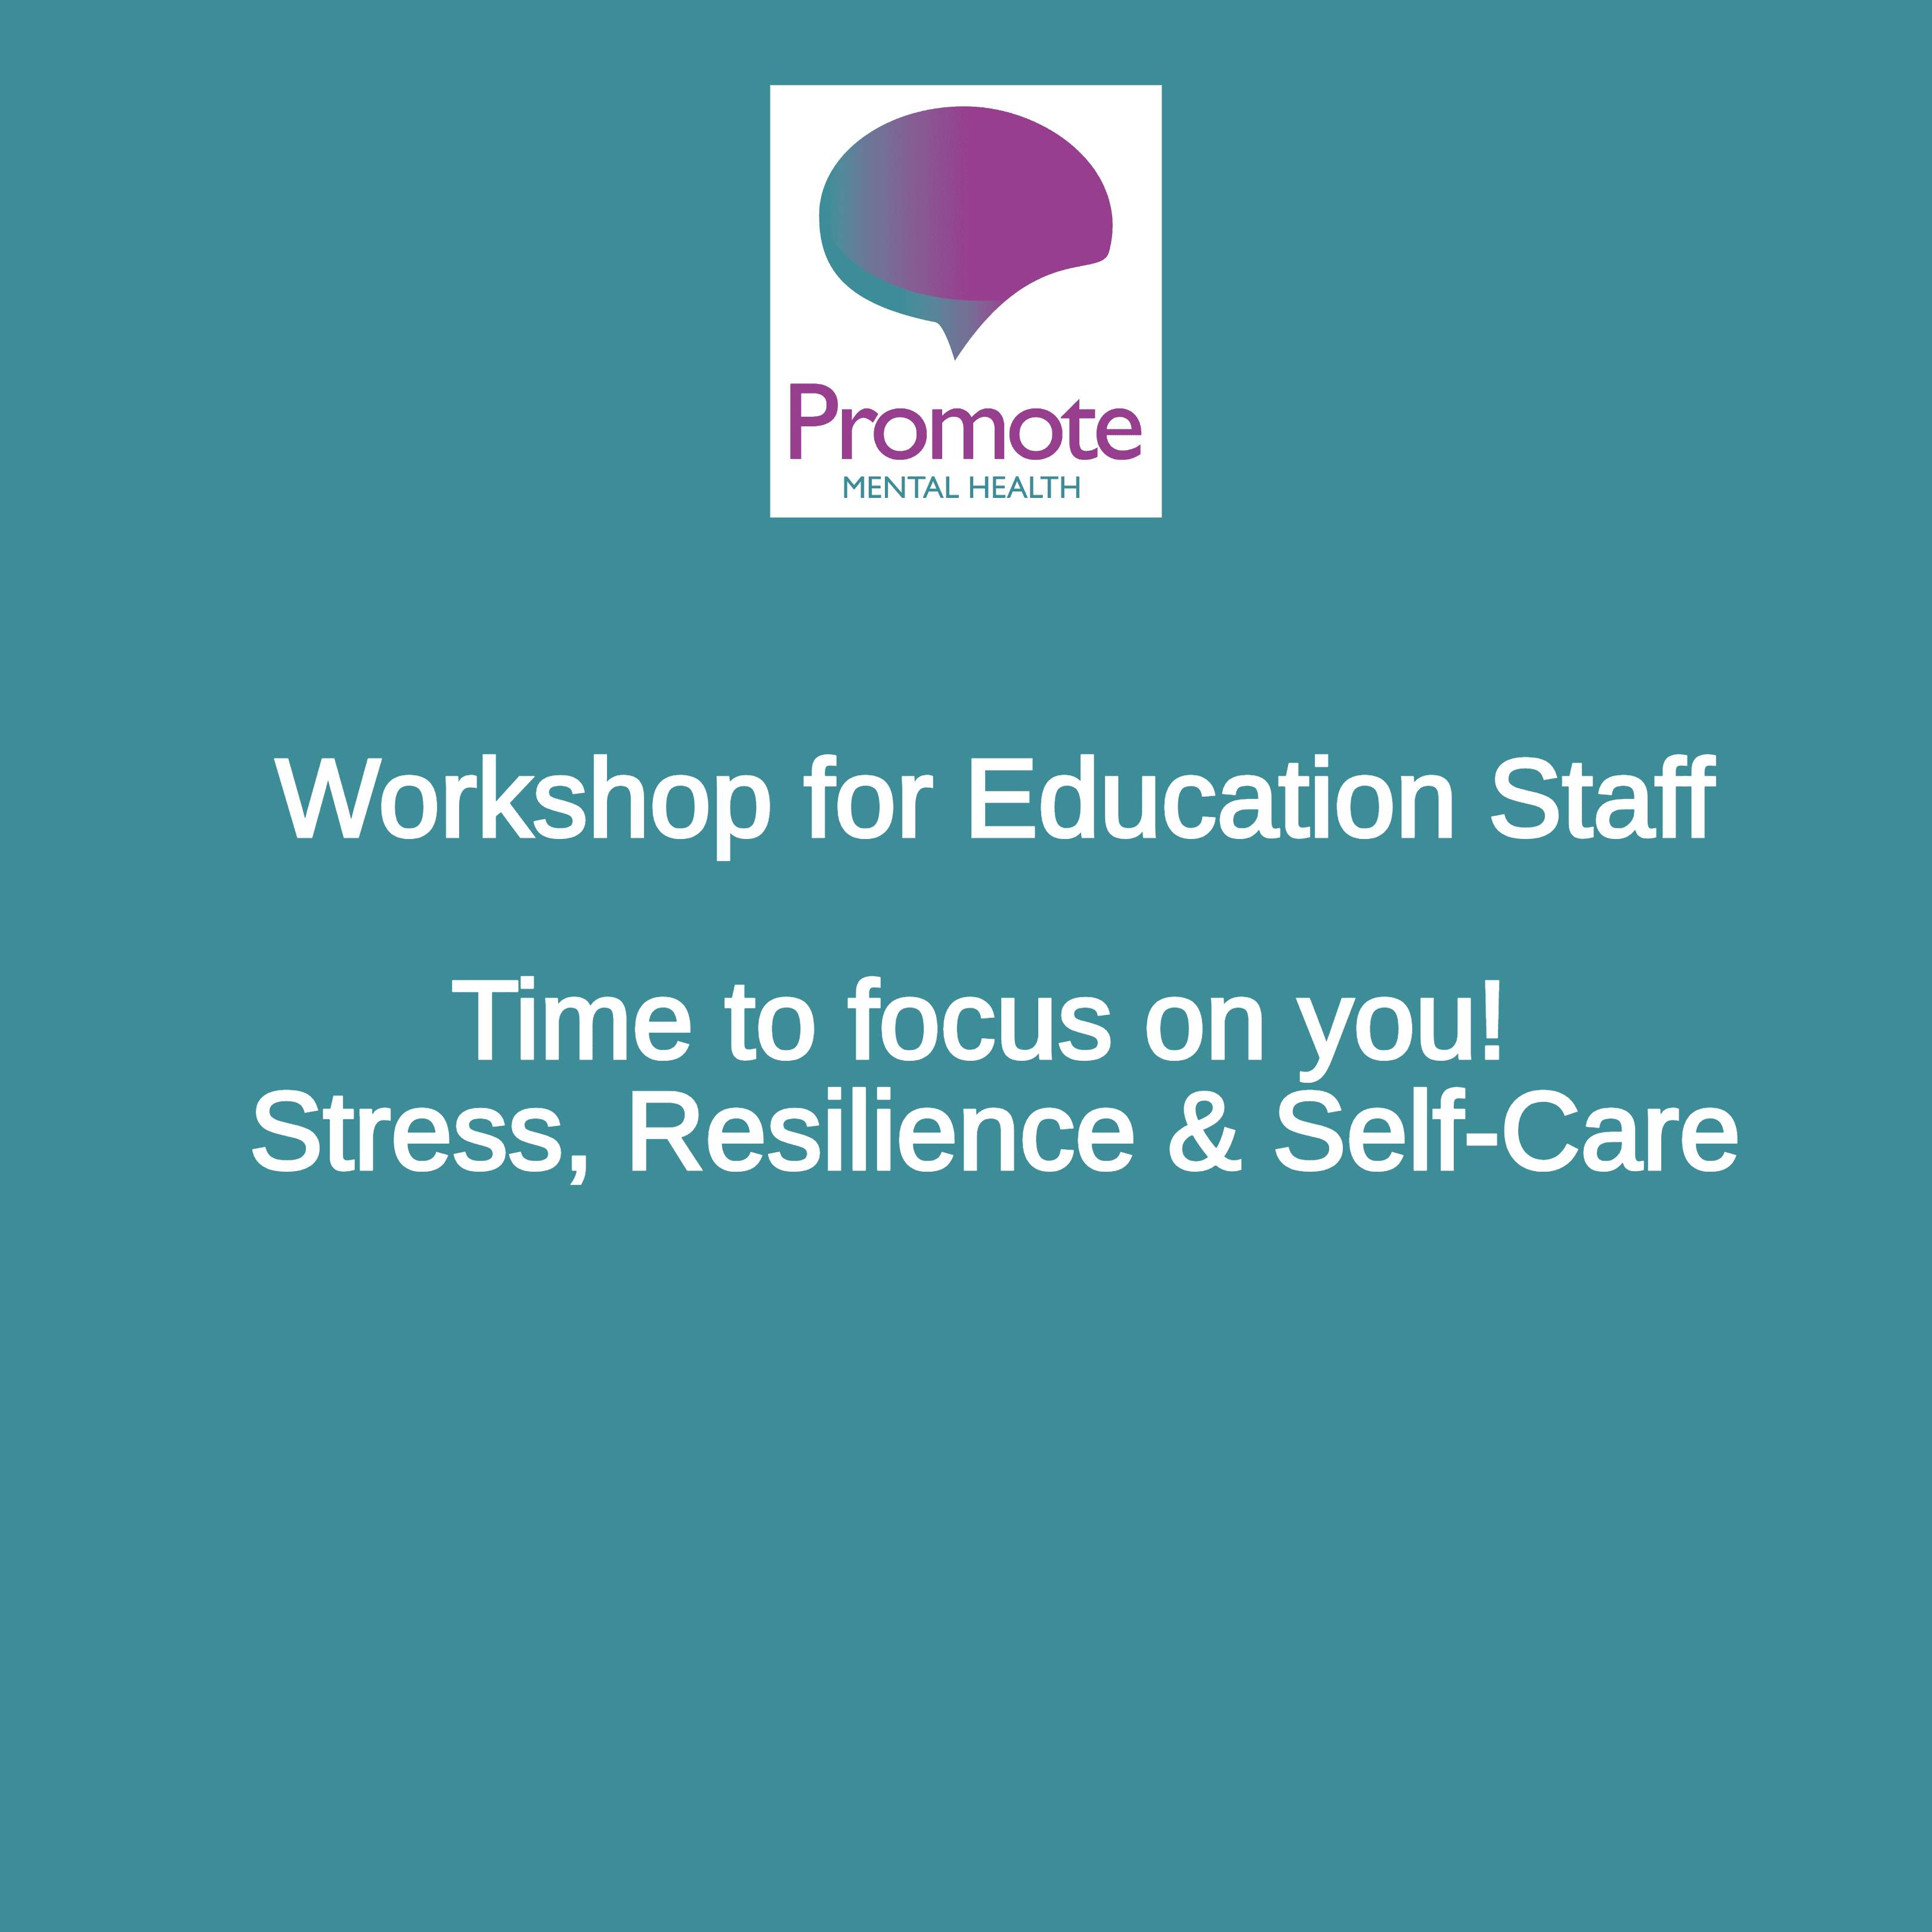 Are you supporting the wellbeing of your Education Staff?